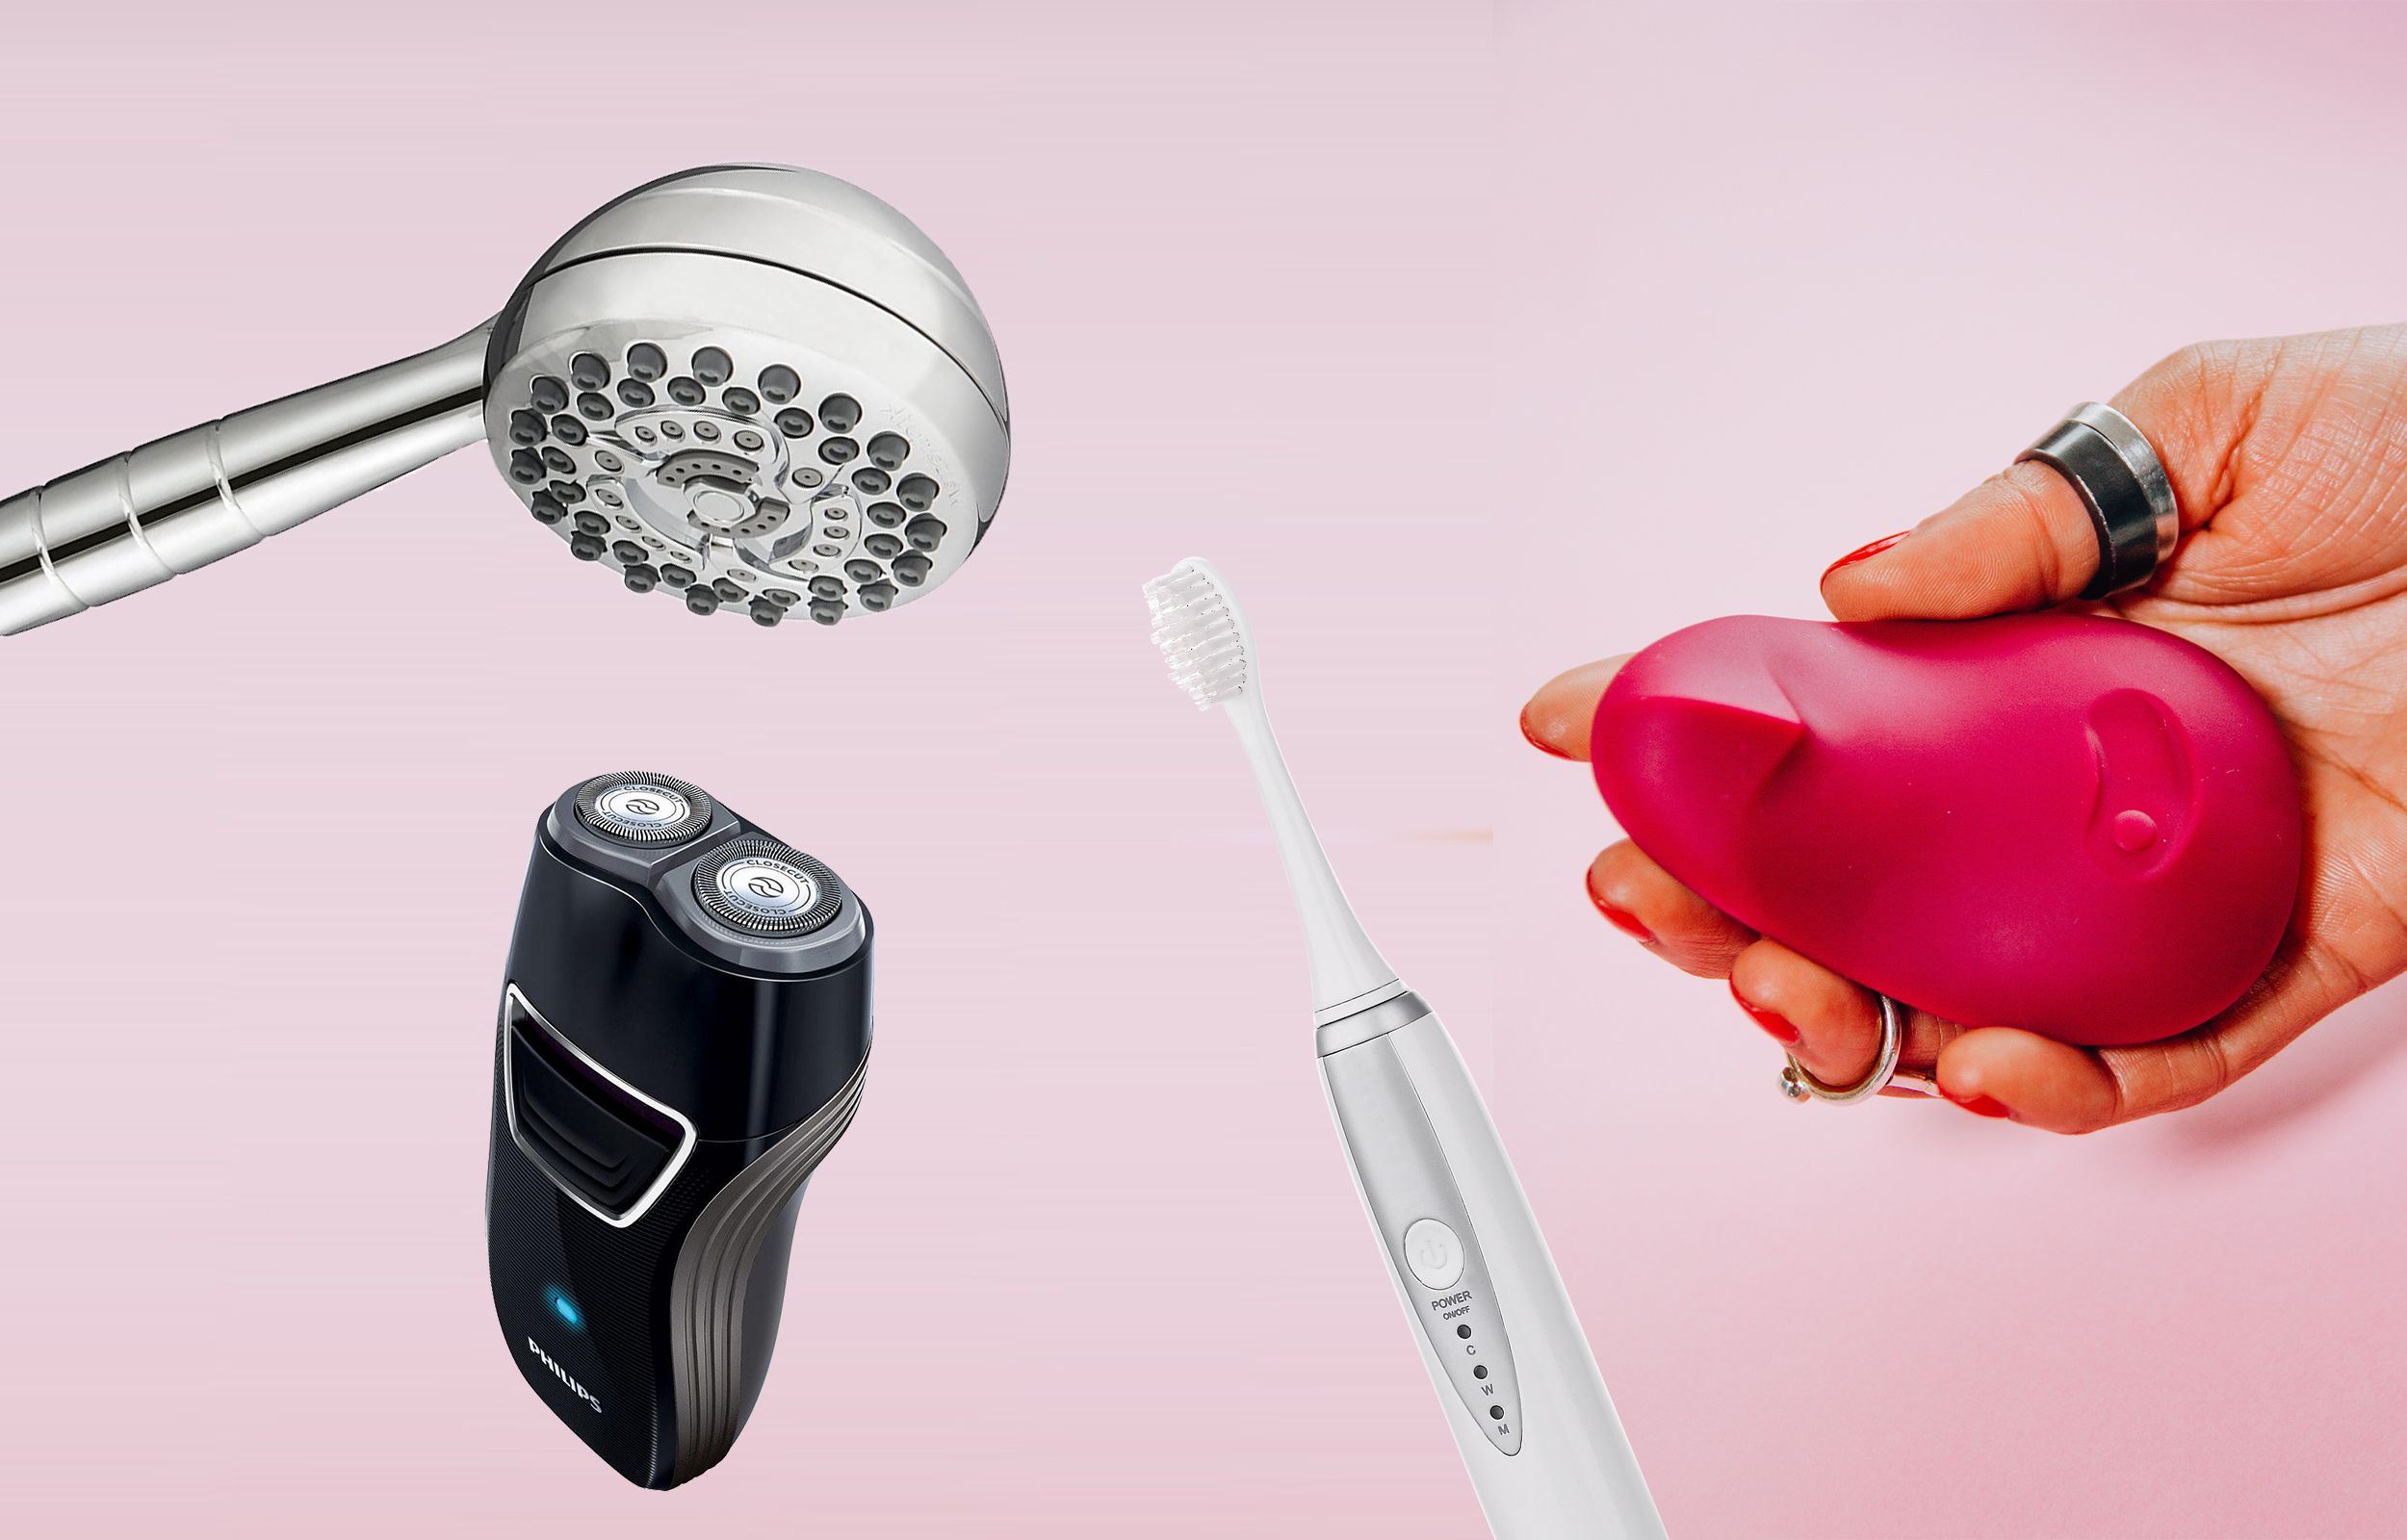 How To Make A Homemade Vibrator? 10 Ideal Ways You Can